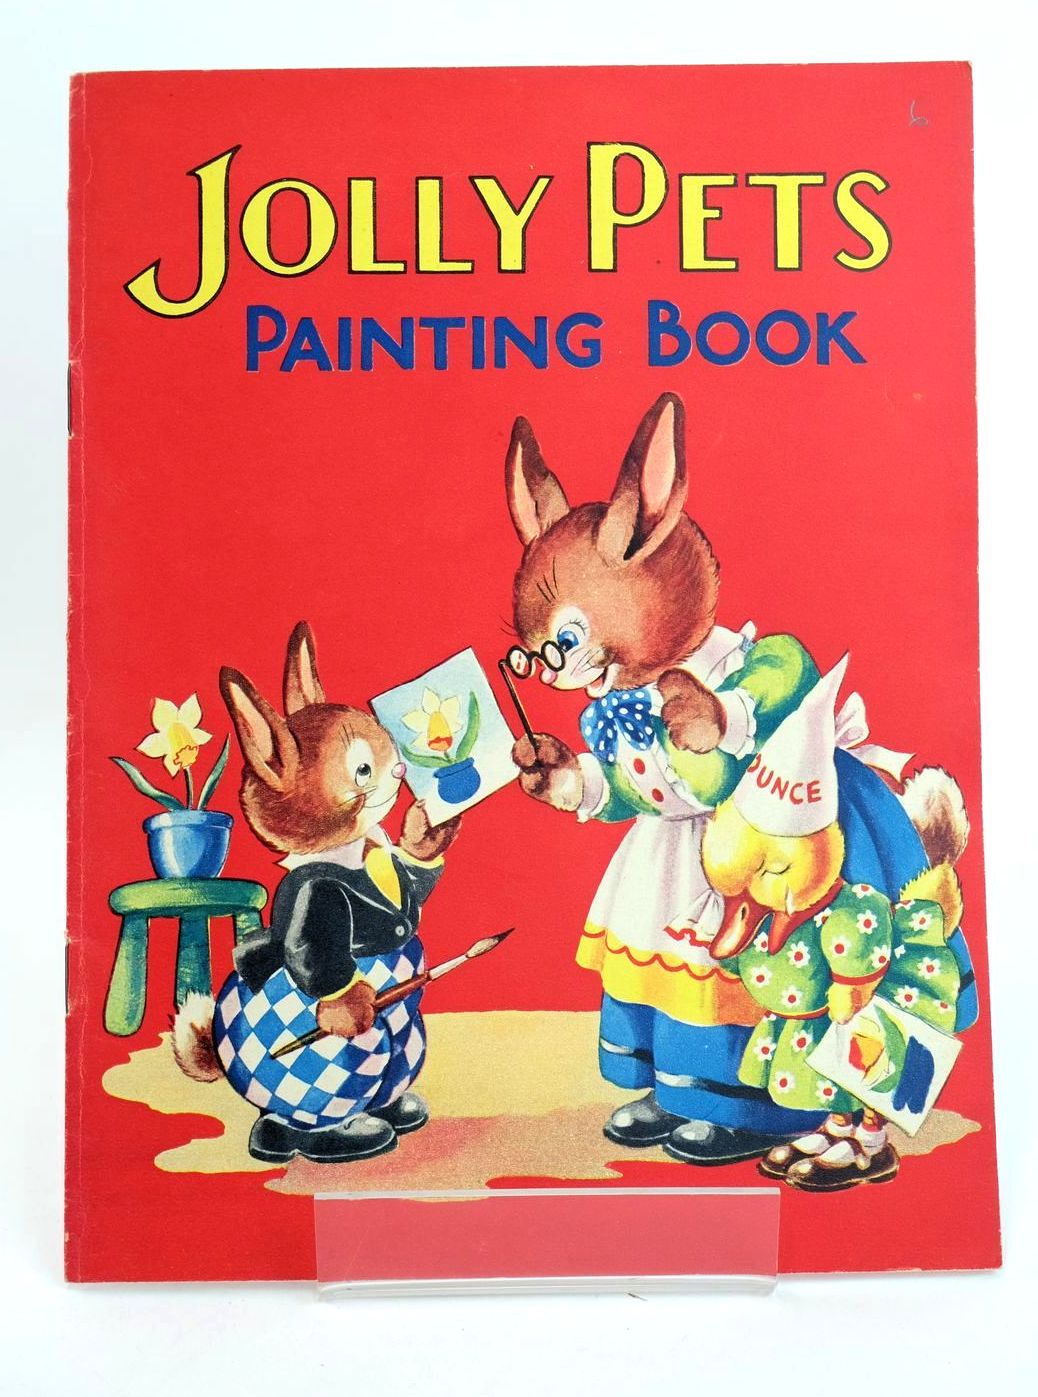 Photo of JOLLY PETS PAINTING BOOK published by Birn Brothers Ltd. (STOCK CODE: 1318567)  for sale by Stella & Rose's Books